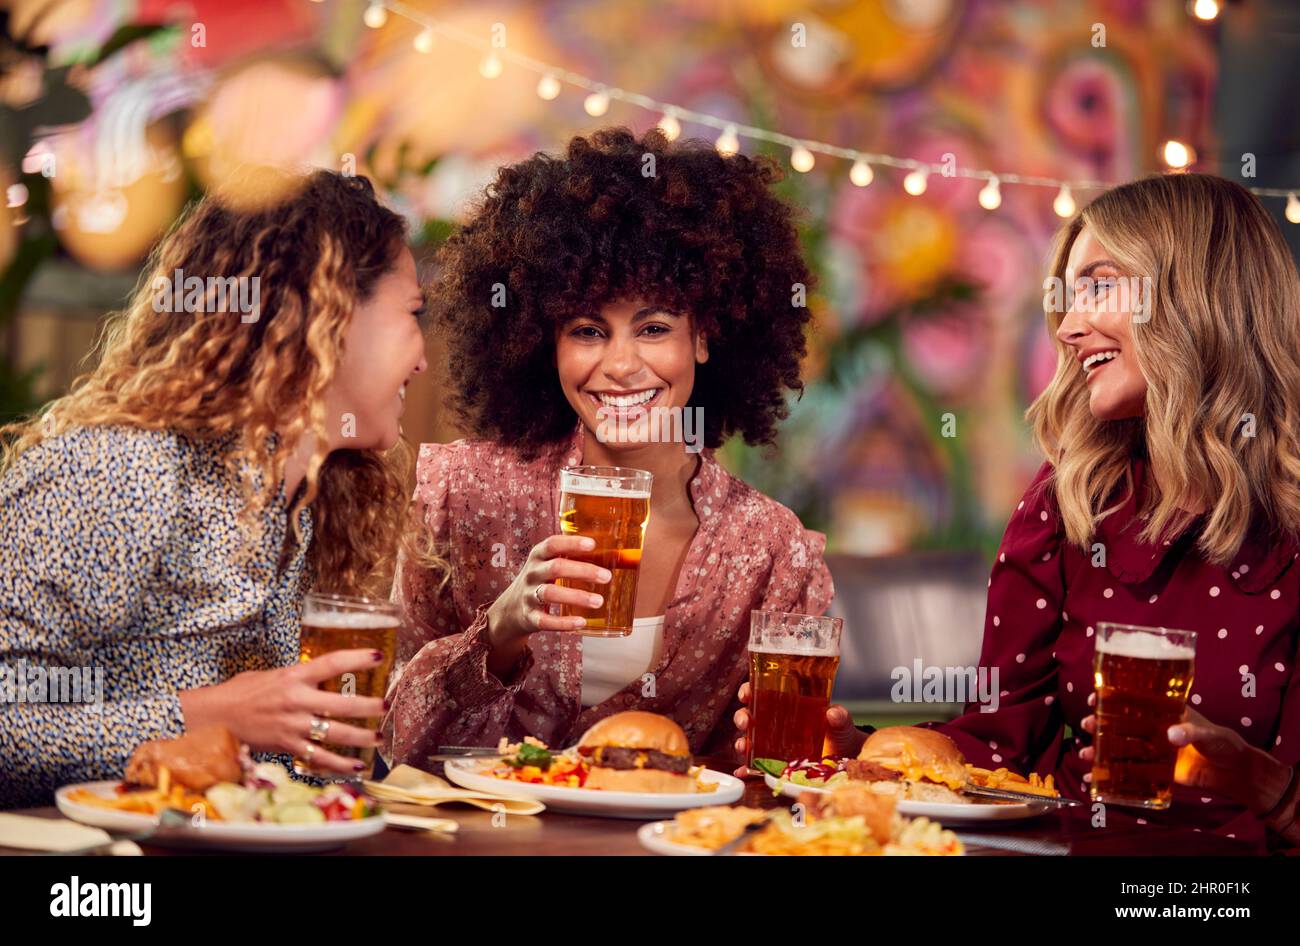 Multi-Cultural Group Of Female Friends Enjoying Night Out Eating Meal And Drinking In Restaurant Stock Photo